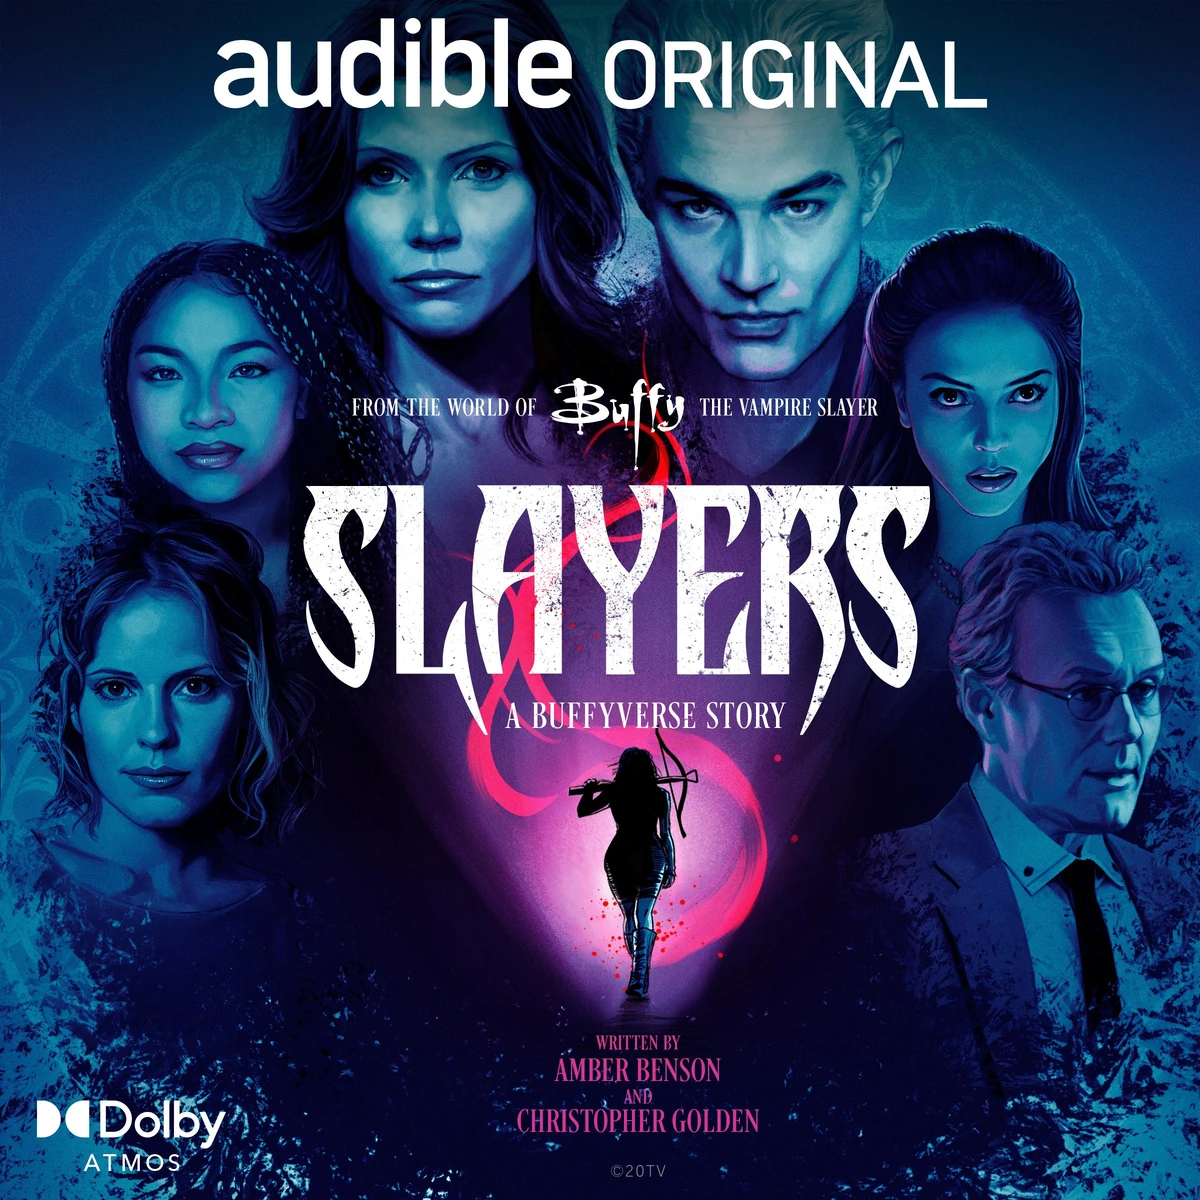 The promo art for 'Slayers: A  Buffyverse Story'.